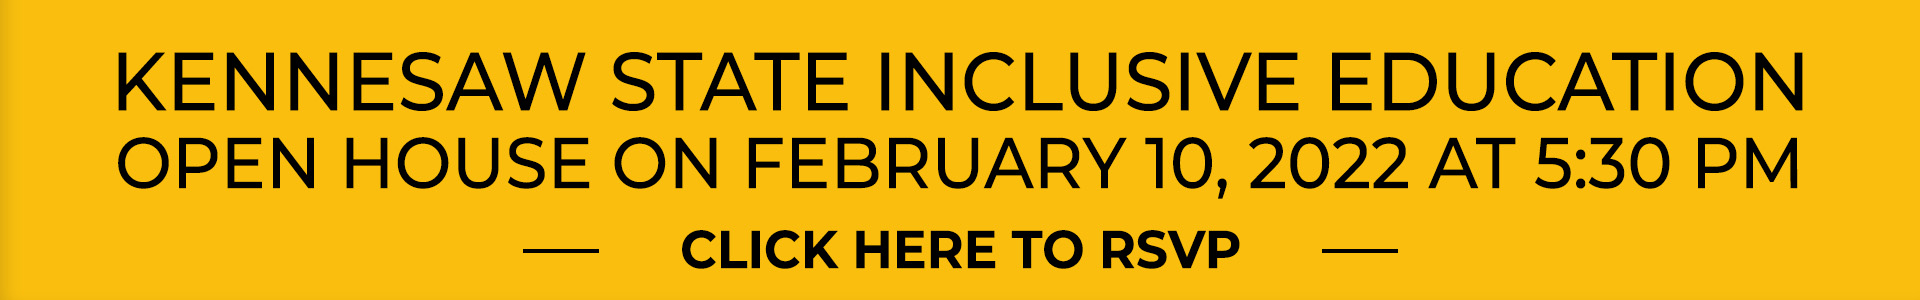 Kennesaw State Inclusive Education Open House